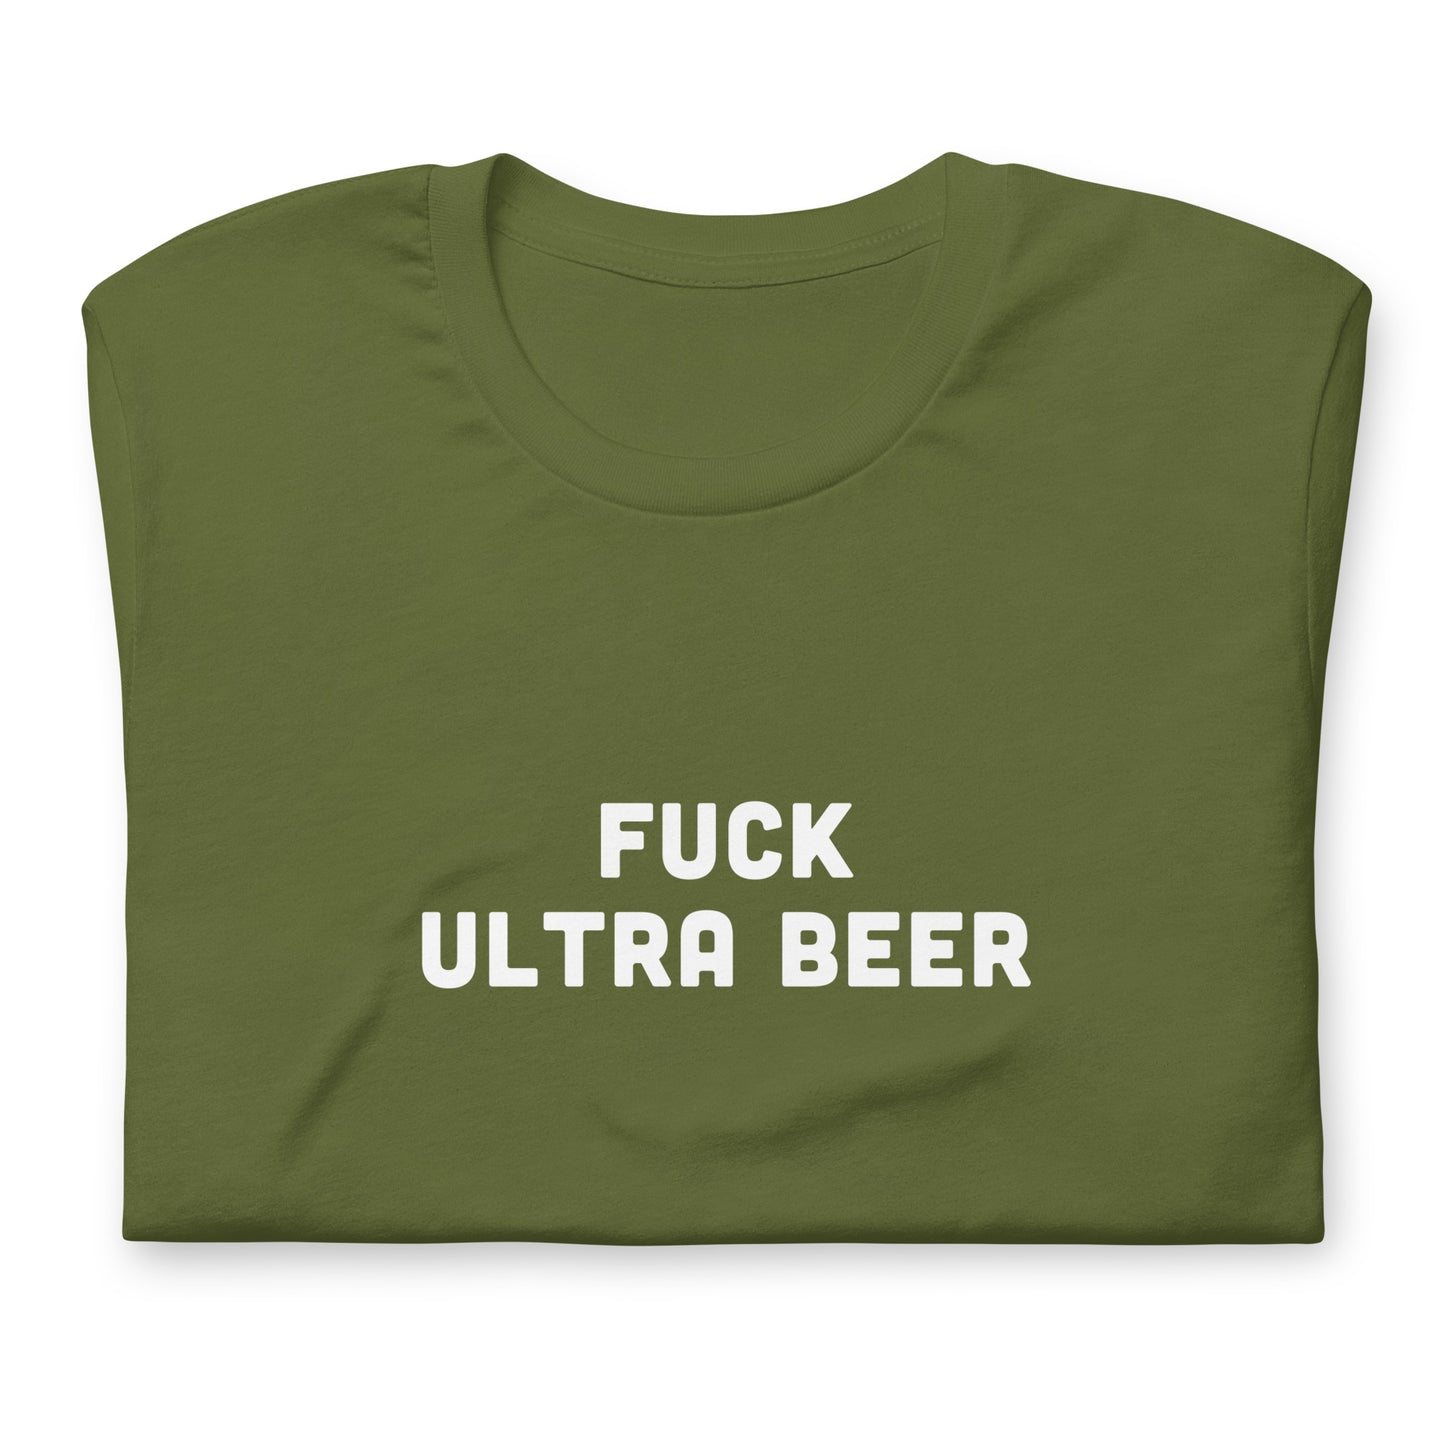 Fuck Ultra Beer T-Shirt Size M Color Navy